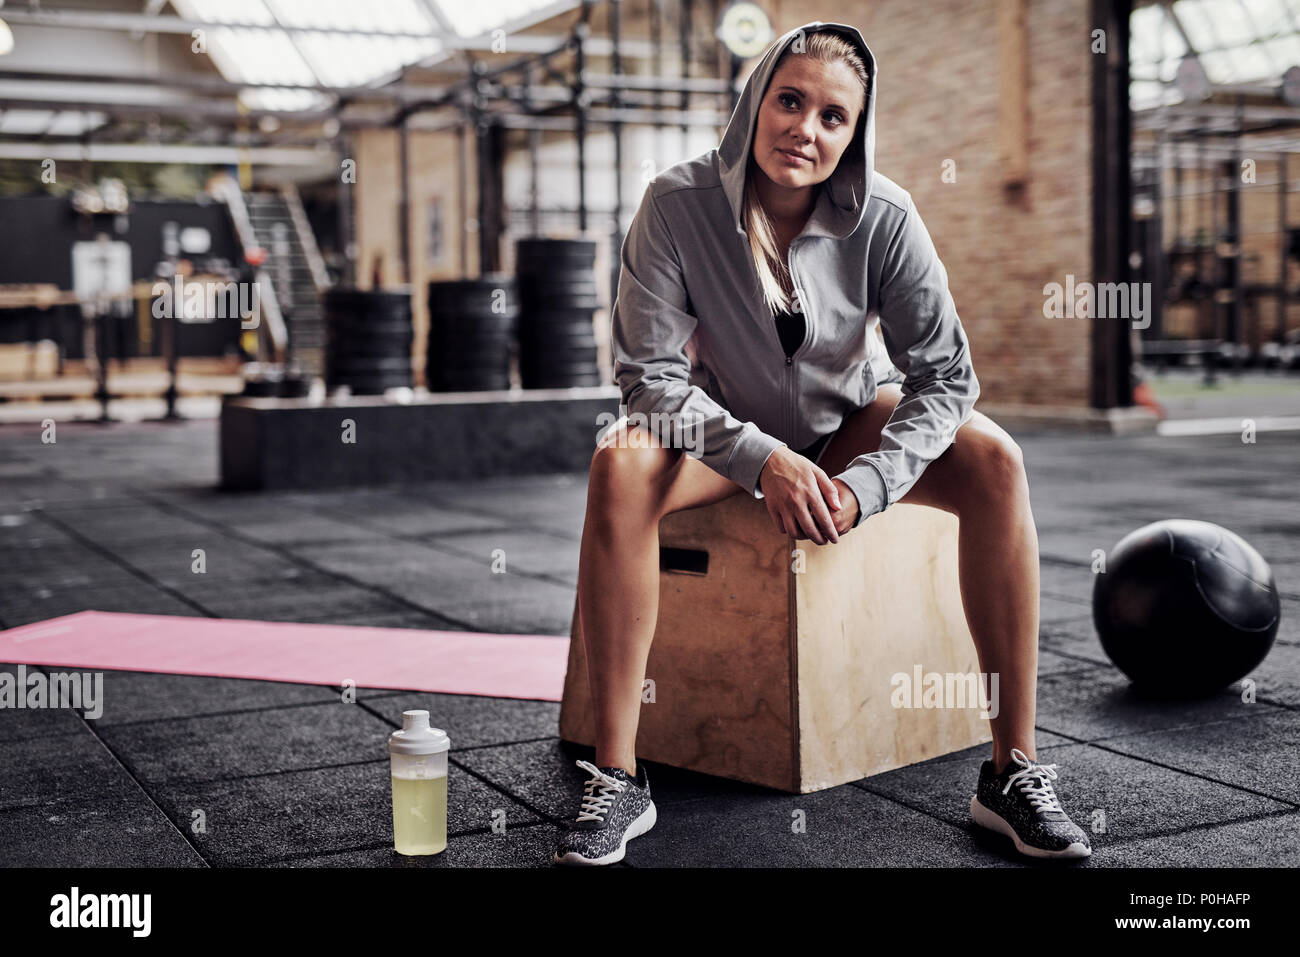 Smiling young blonde woman in exercise clothing sitting alone on a box in a  gym thinking about her workout Stock Photo - Alamy